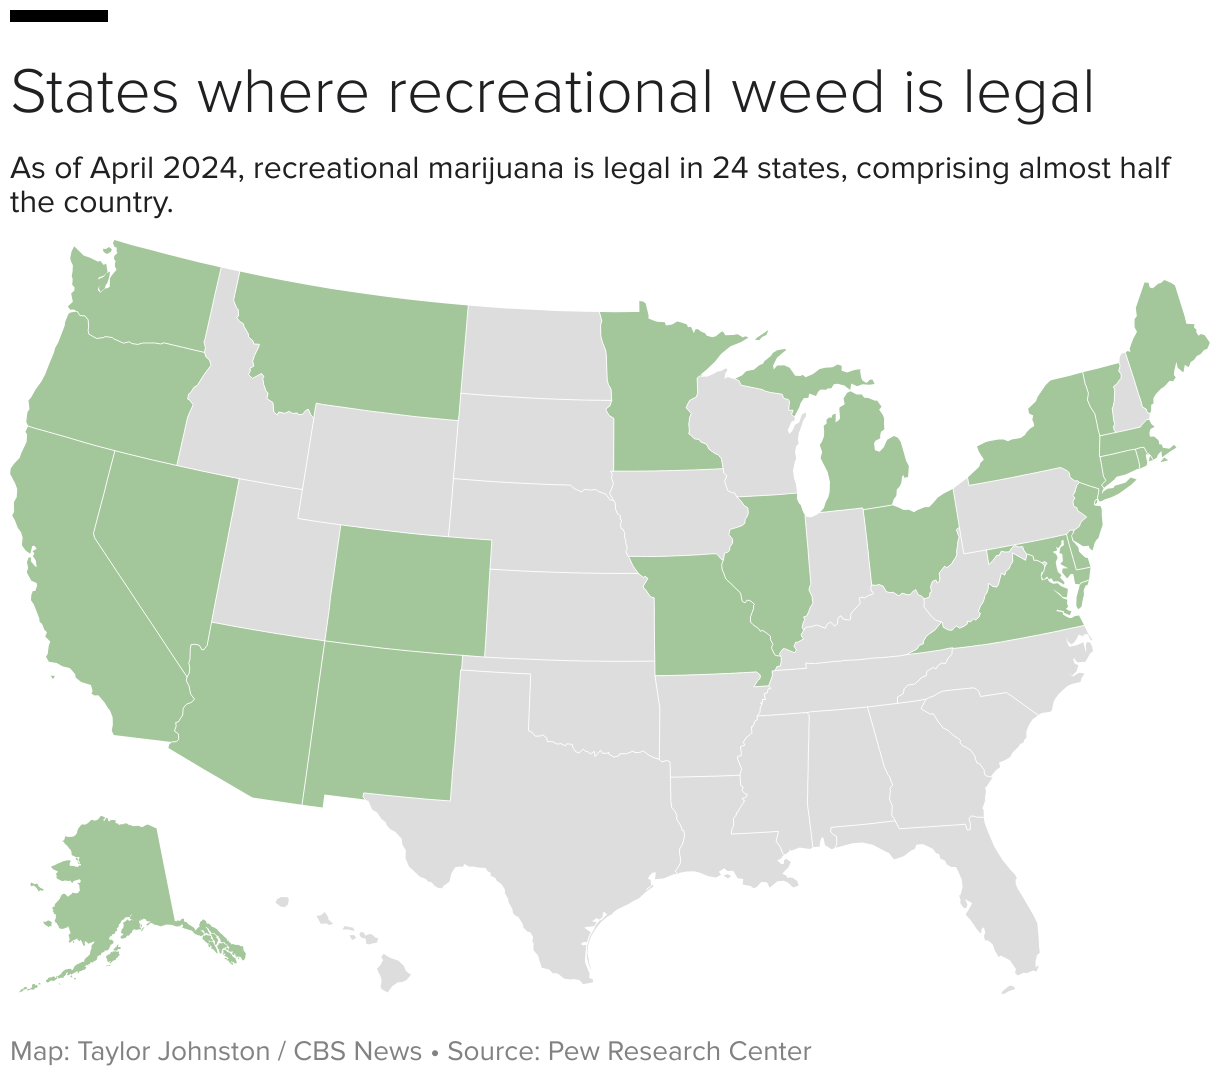 US map of states where recreational weed is legal